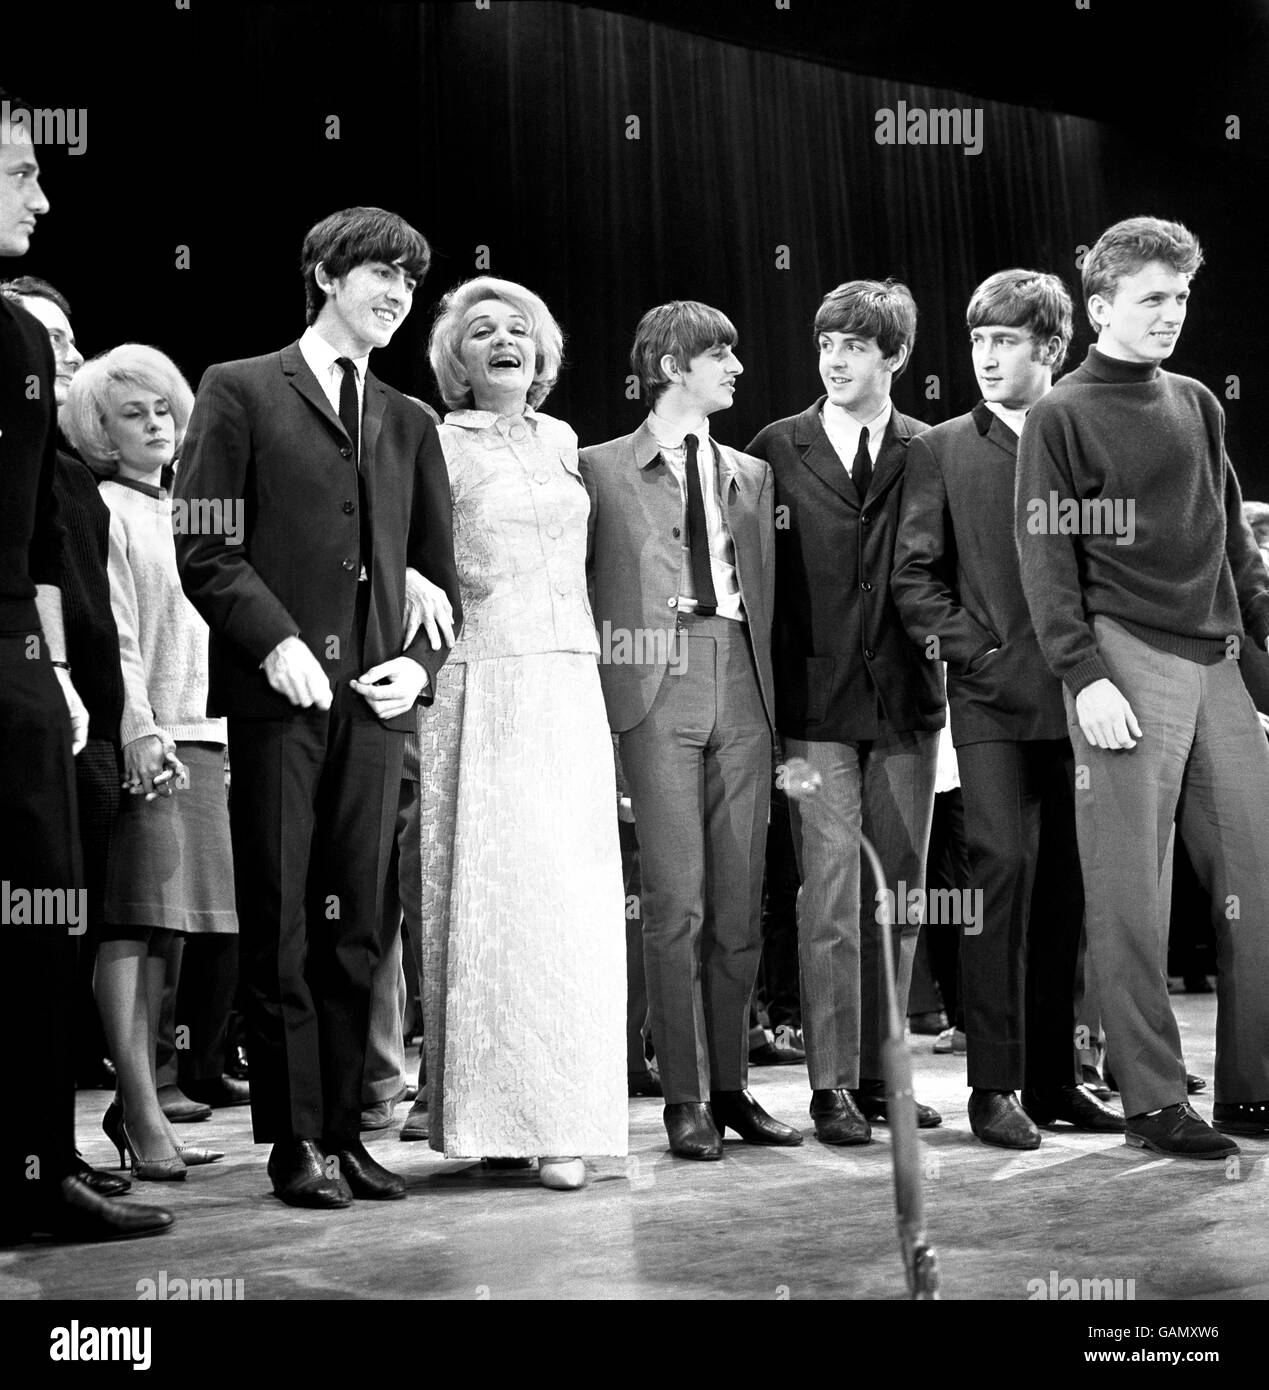 Hollywood's ageless 'glamorous grannie', Marlene Dietrich, joins some of the new generation of entertainers, The Beatles and singer-actor Tommy Steele (extreme right), on the stage of the Prince of Wales theatre, London. Stock Photo